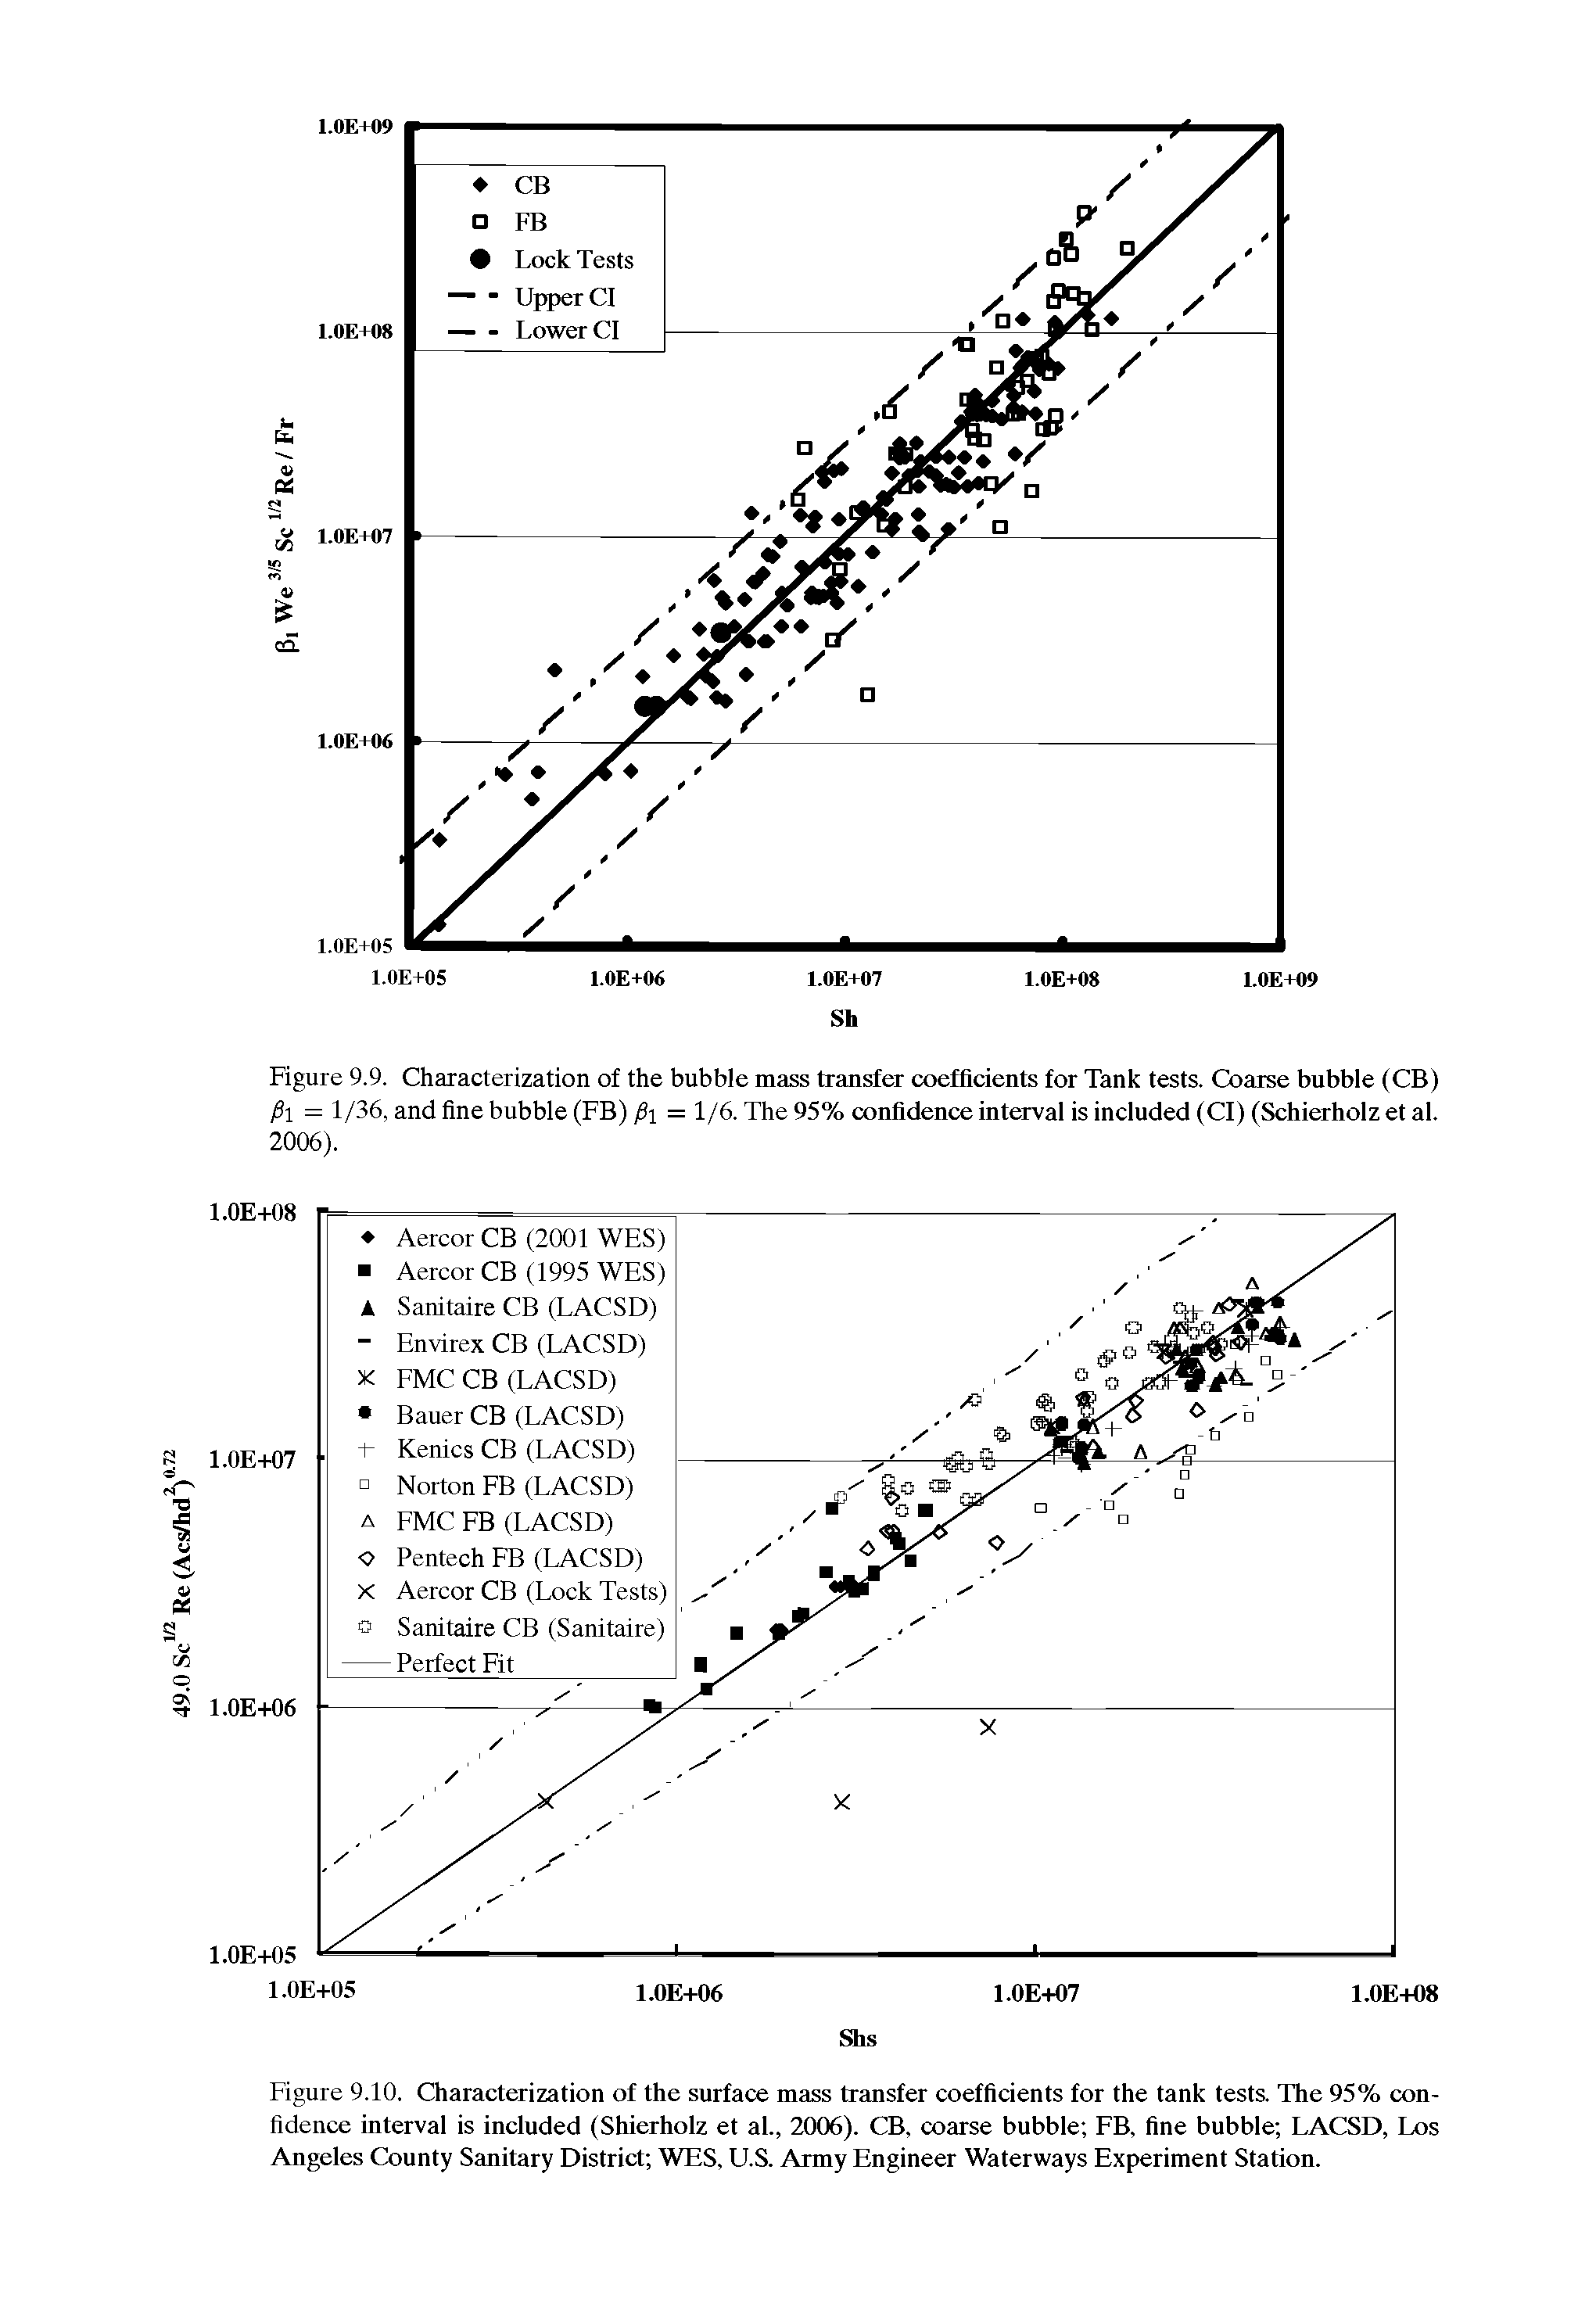 Figure 9.10. Characterization of the surface mass transfer coefficients for the tank tests. The 95% confidence interval is included (Shierholz et al., 2006). CB, coarse bubble FB, fine bubble LACSD, Los Angeles County Sanitary District WES, U.S. Army Engineer Waterways Experiment Station.